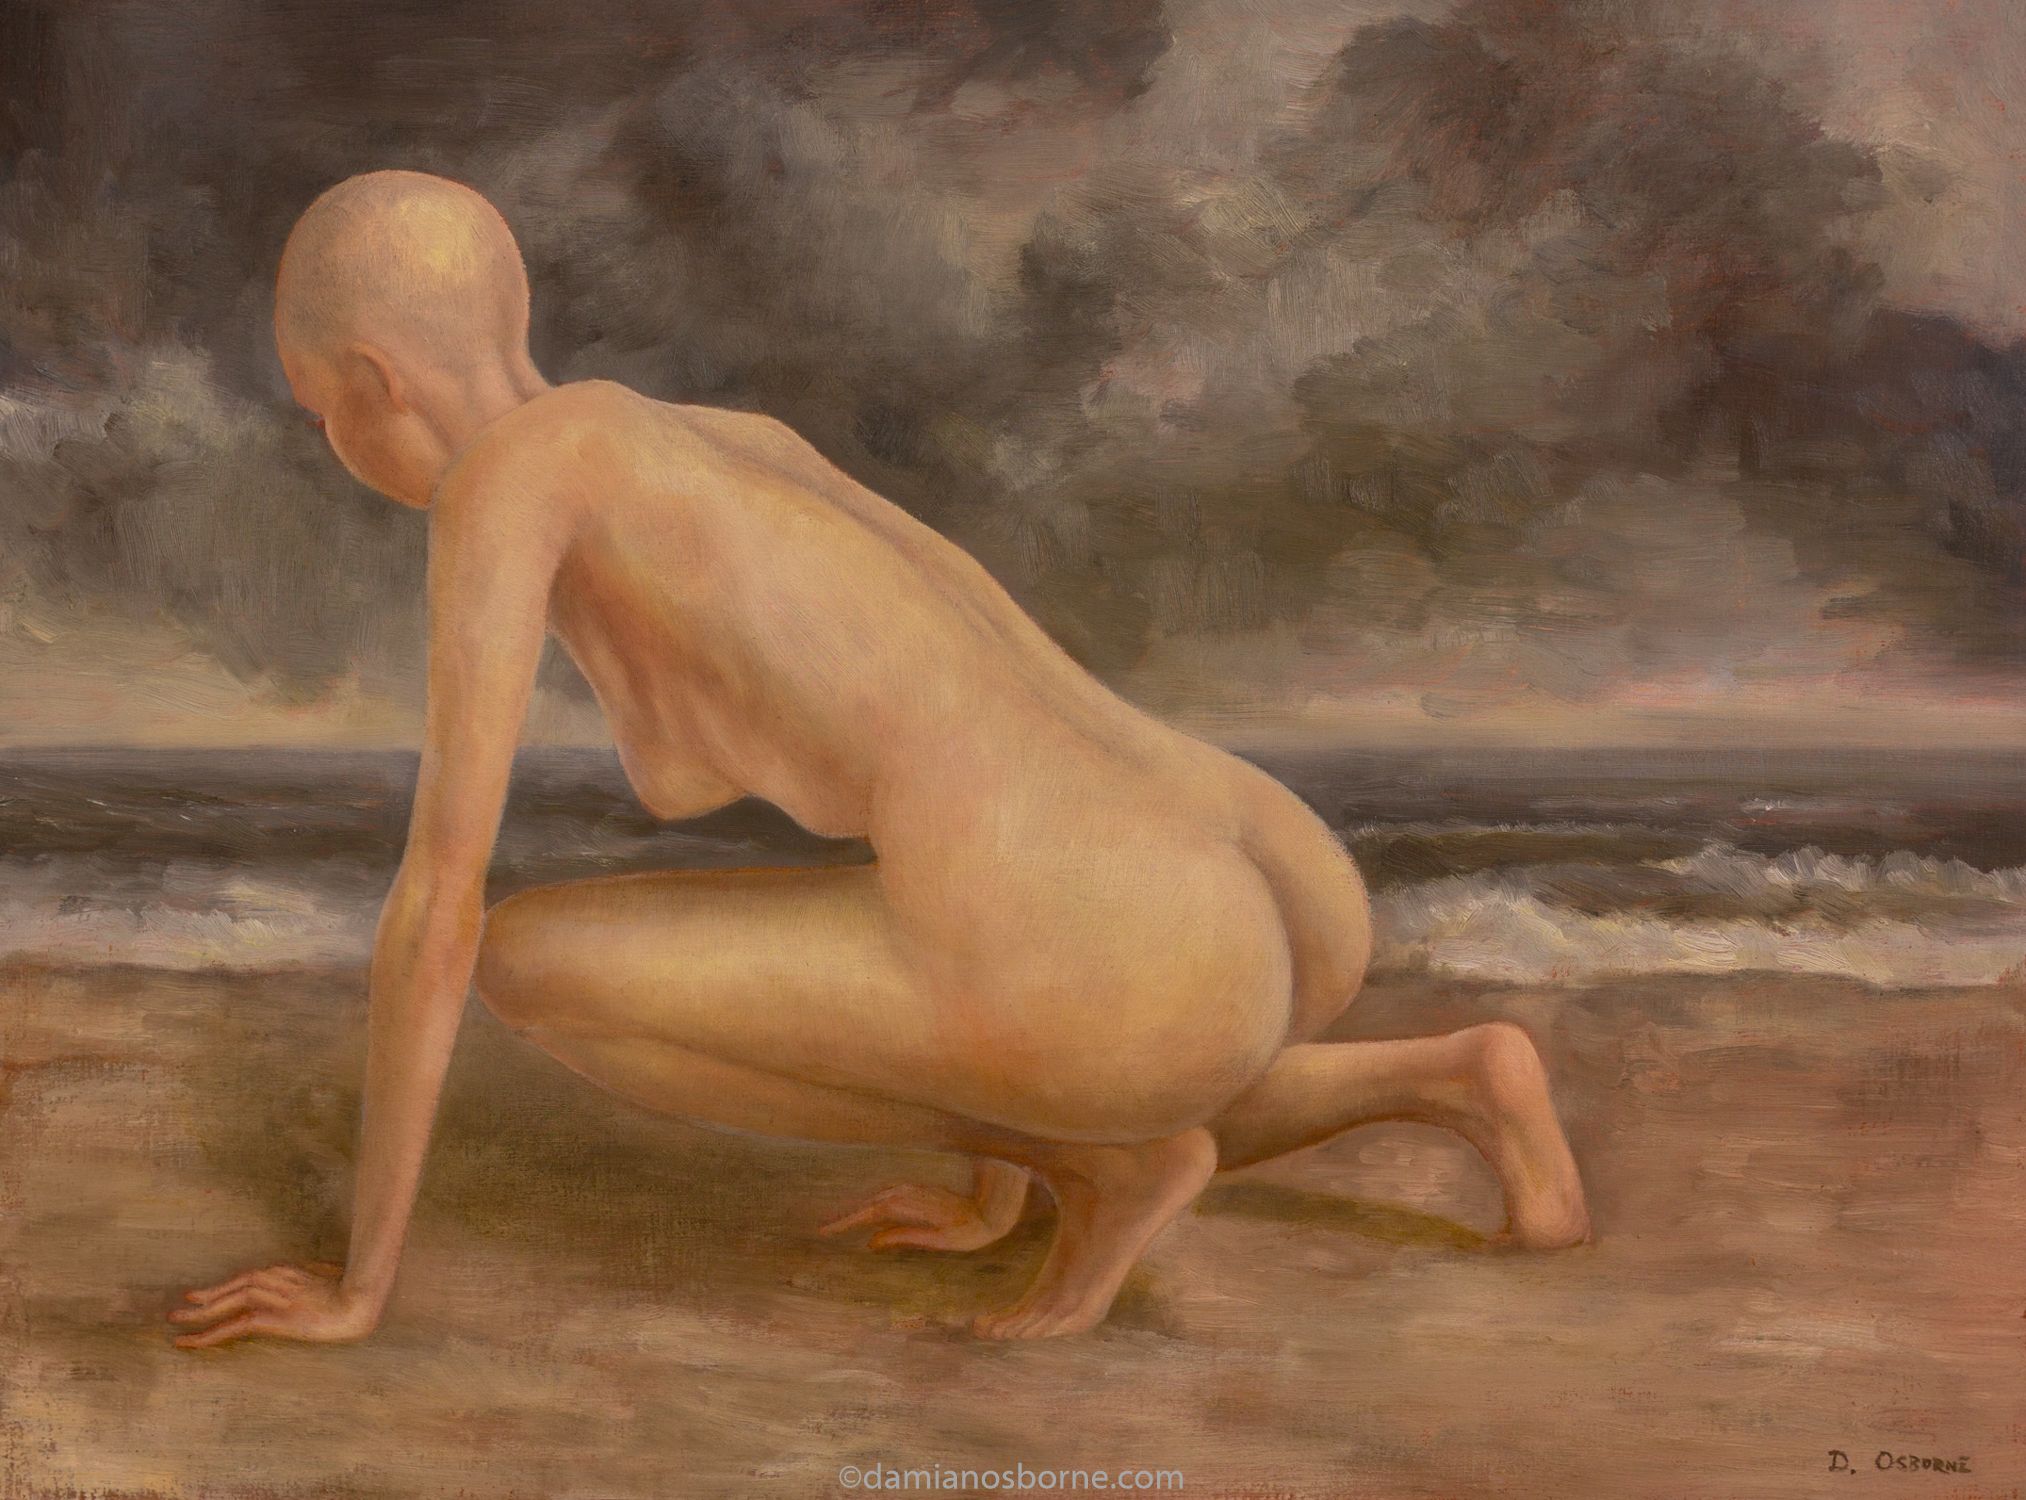 The Ocean and the Giantess, figure painting by Damian Osborne of nude woman crouching on seashore